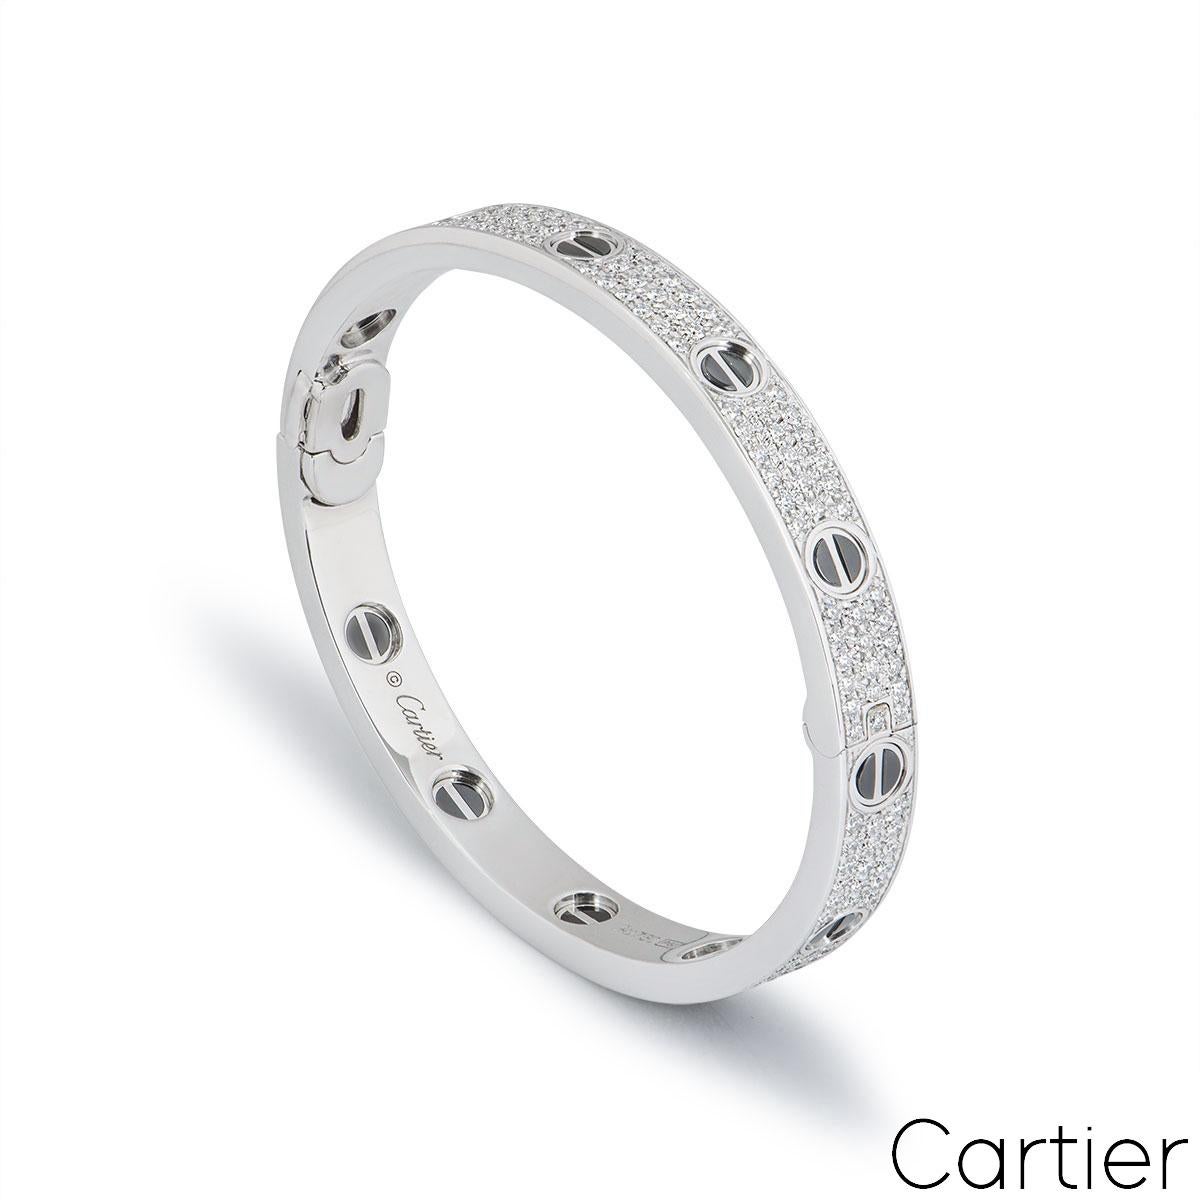 A stunning 18k white gold diamond and ceramic bracelet by Cartier from the Love collection. The bracelet has black ceramic set to the iconic screw motifs around the outer edge with 204 round brilliant cut diamonds pave set between the screws with an